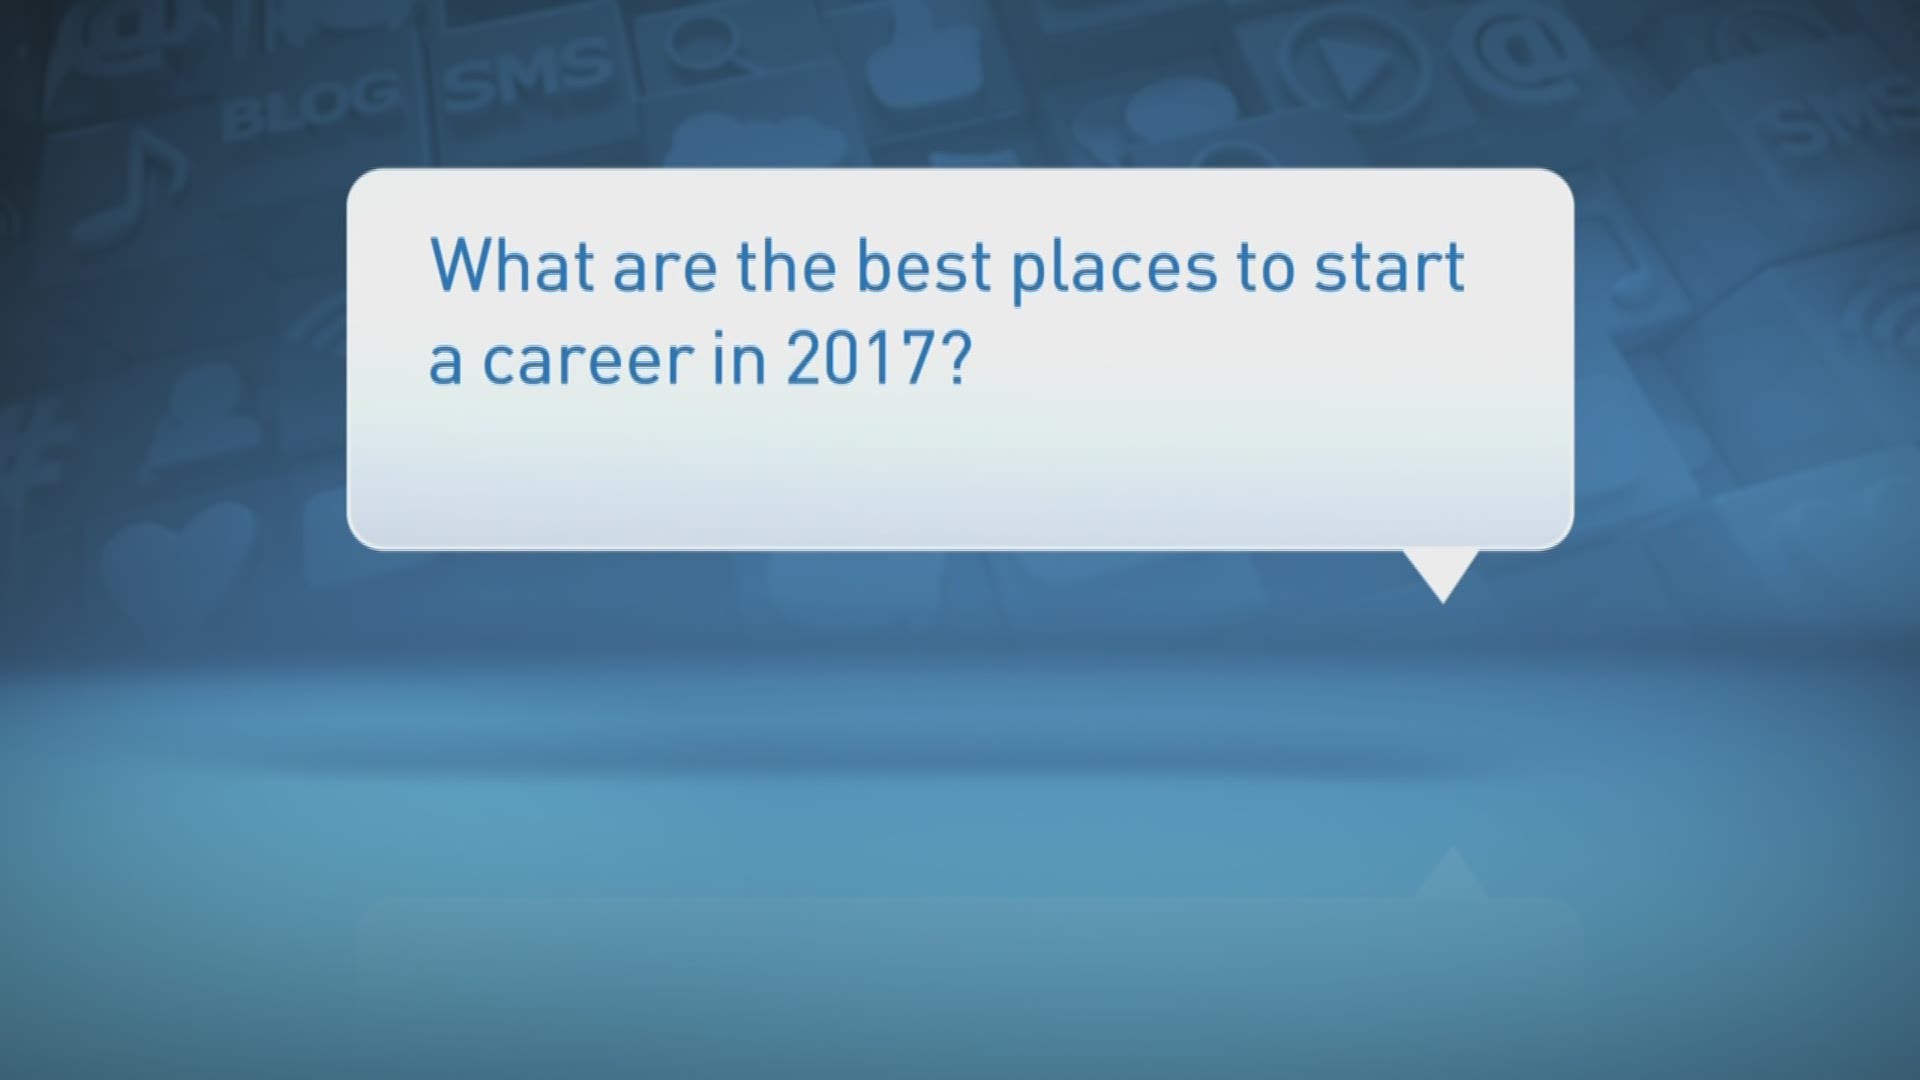 Wallethub.com lists the top five best places to start a career.